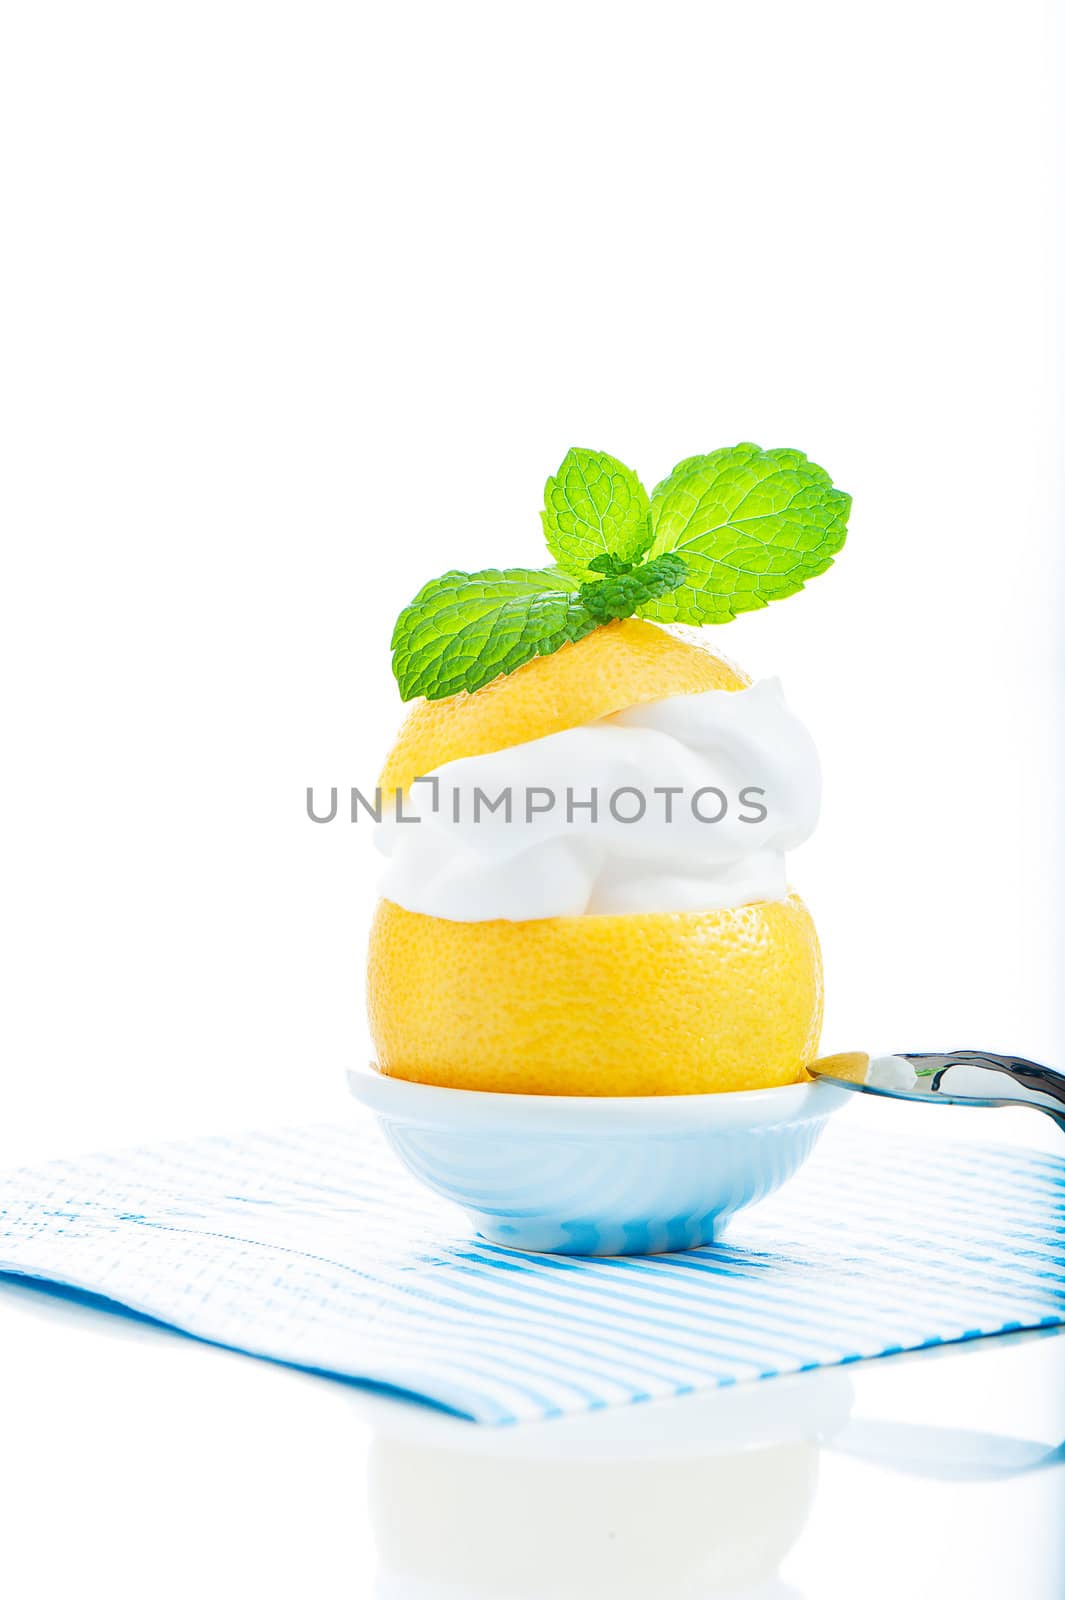 A fresh lemon with lemon cream and mint on the top on white background as a studio shot